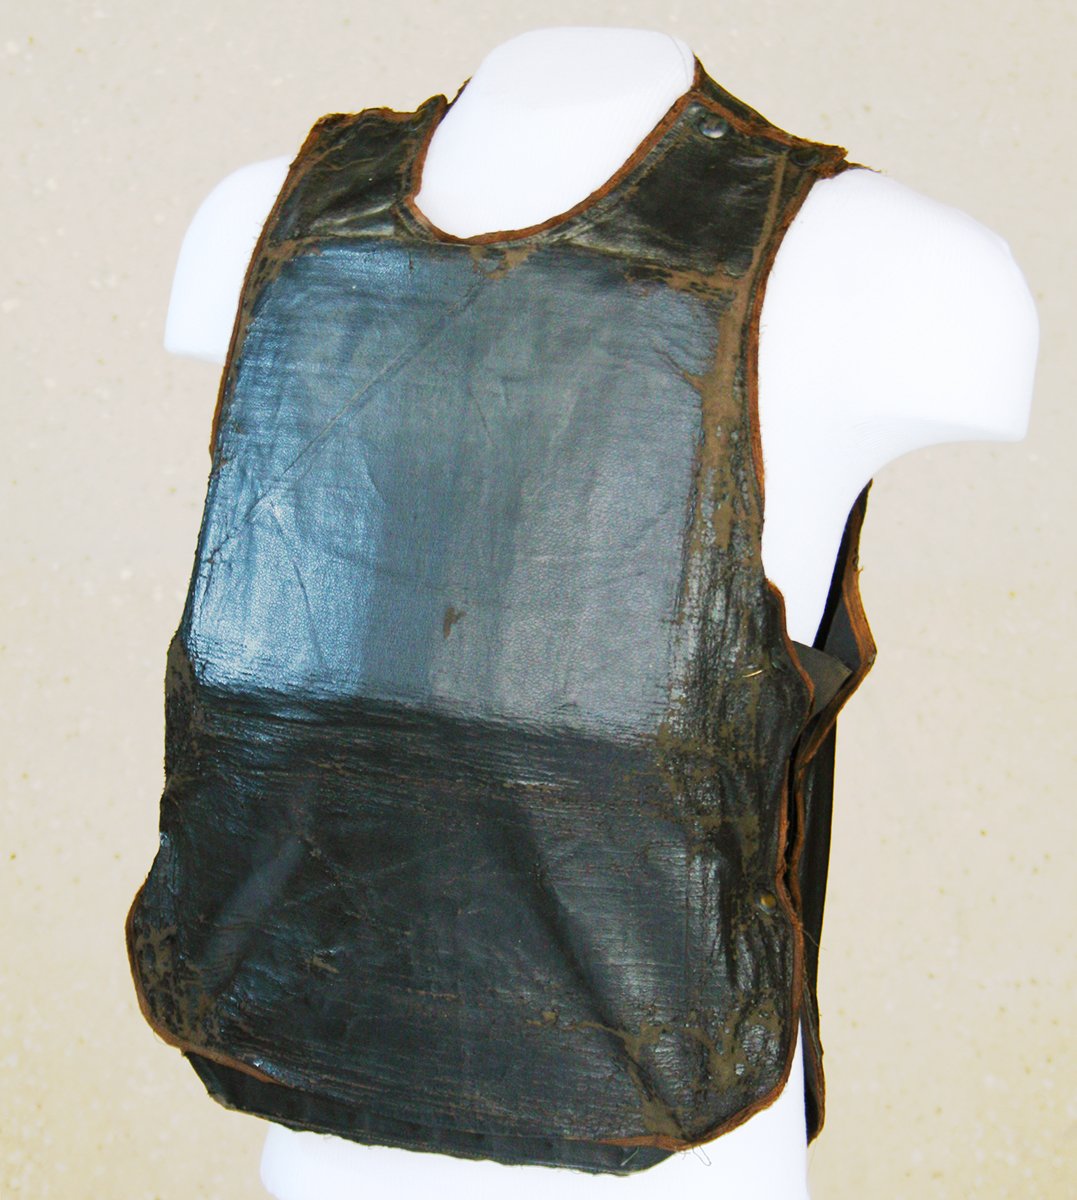 Photo of body armor on a mannequin, used by notorious gangster "Baby Face" Nelson.